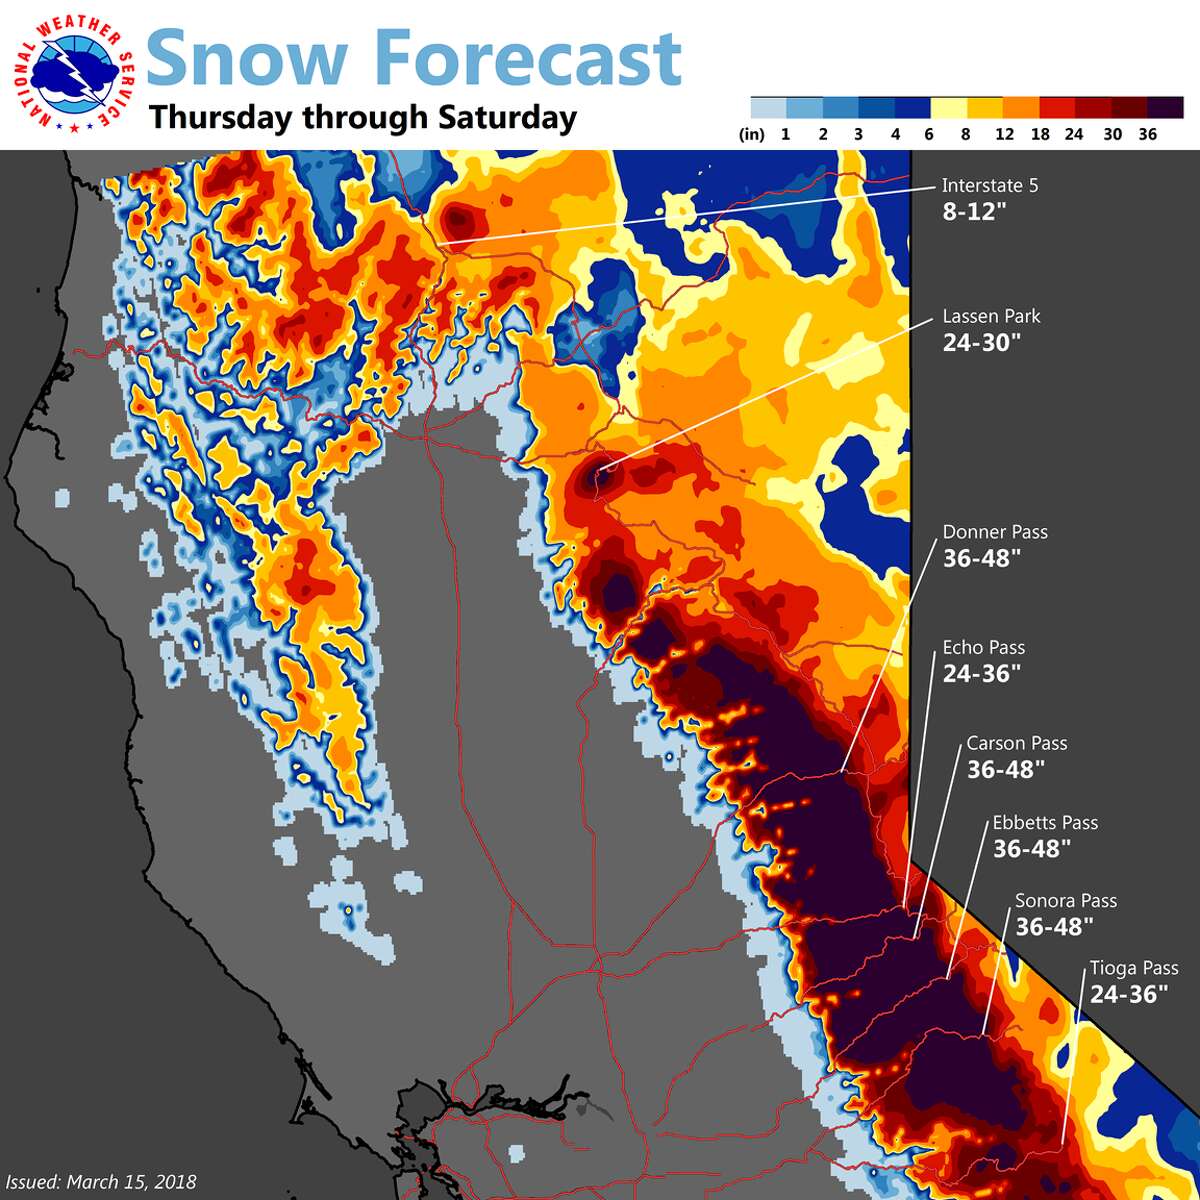 Storm Forecast To Blast Sierra With Up To 5 Feet Of Snow Roads Could Close